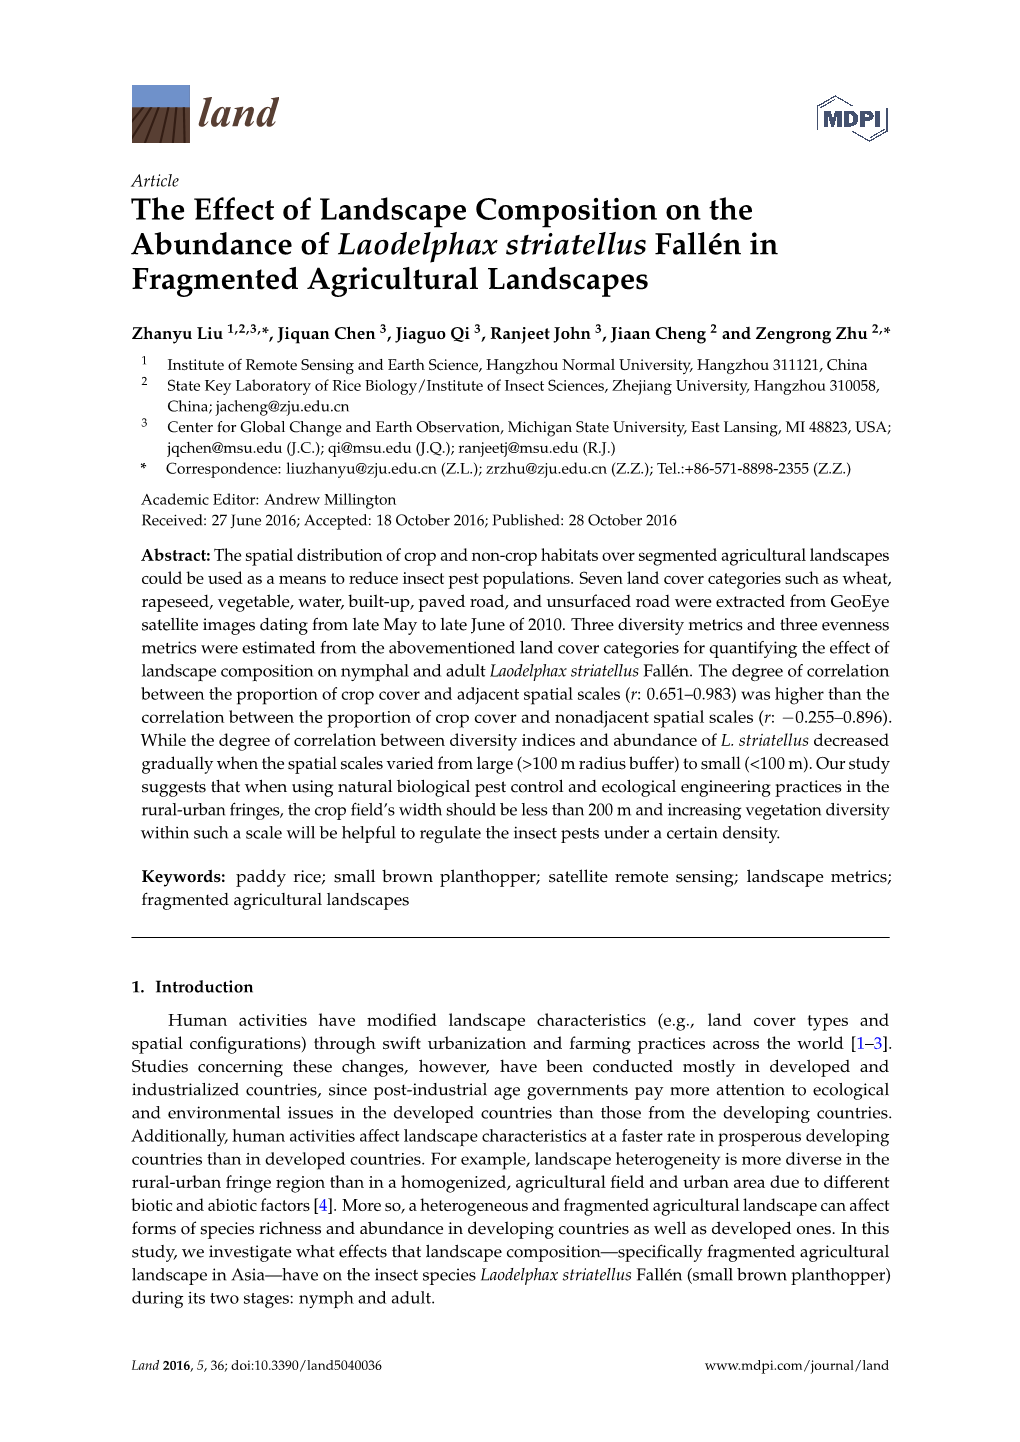 The Effect of Landscape Composition on the Abundance of Laodelphax Striatellus Fallén in Fragmented Agricultural Landscapes